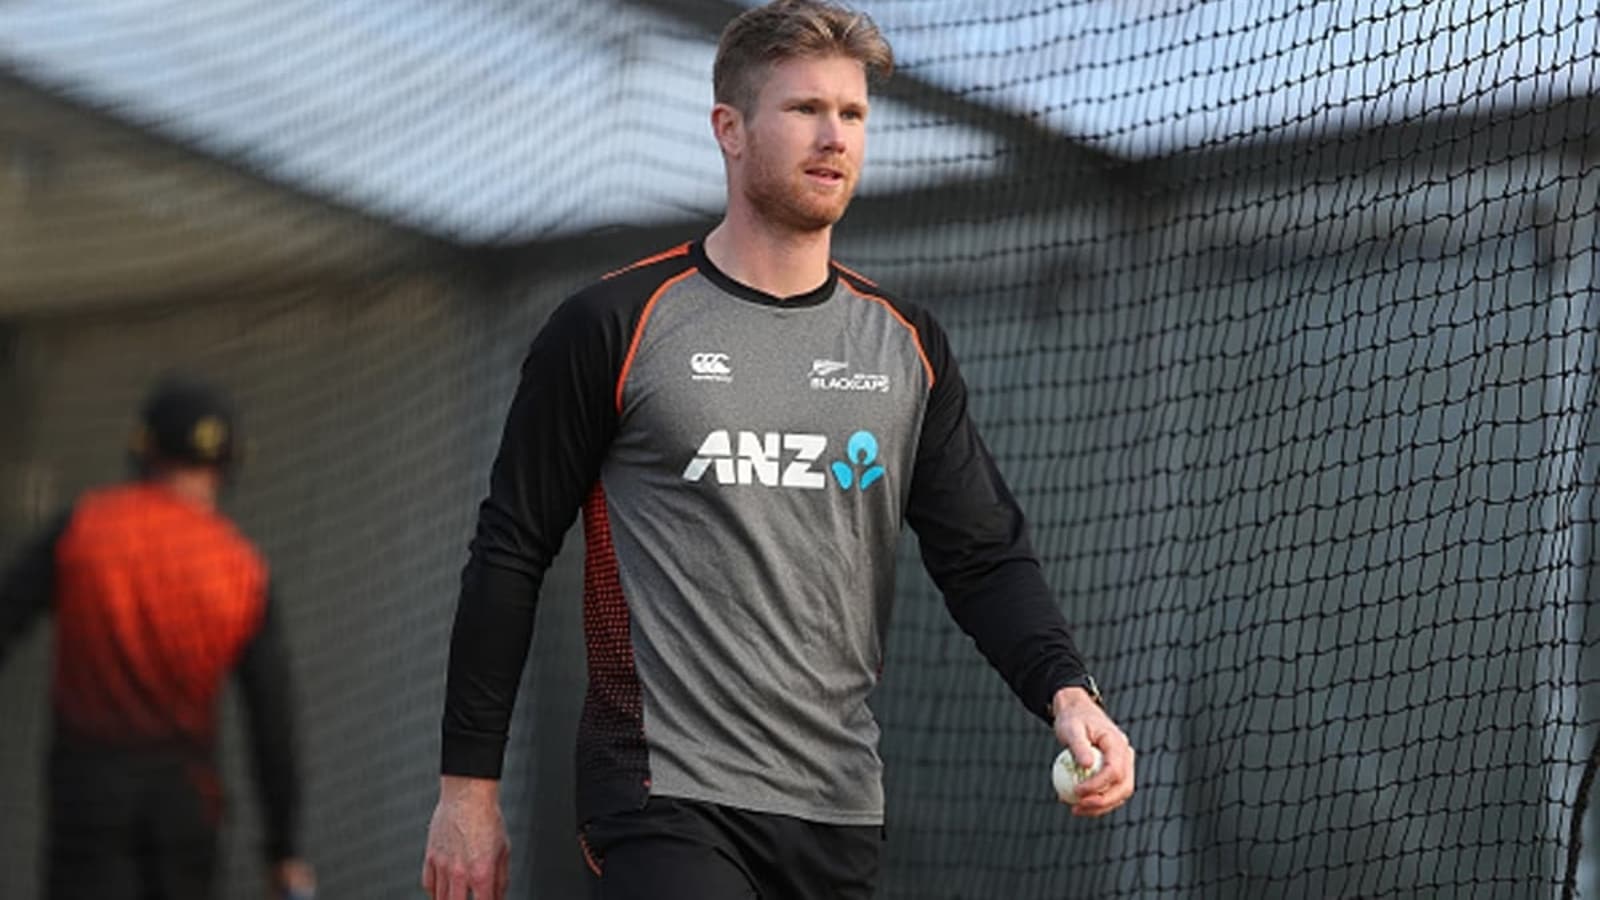 New Zealand announce their squad for the T20 World Cup